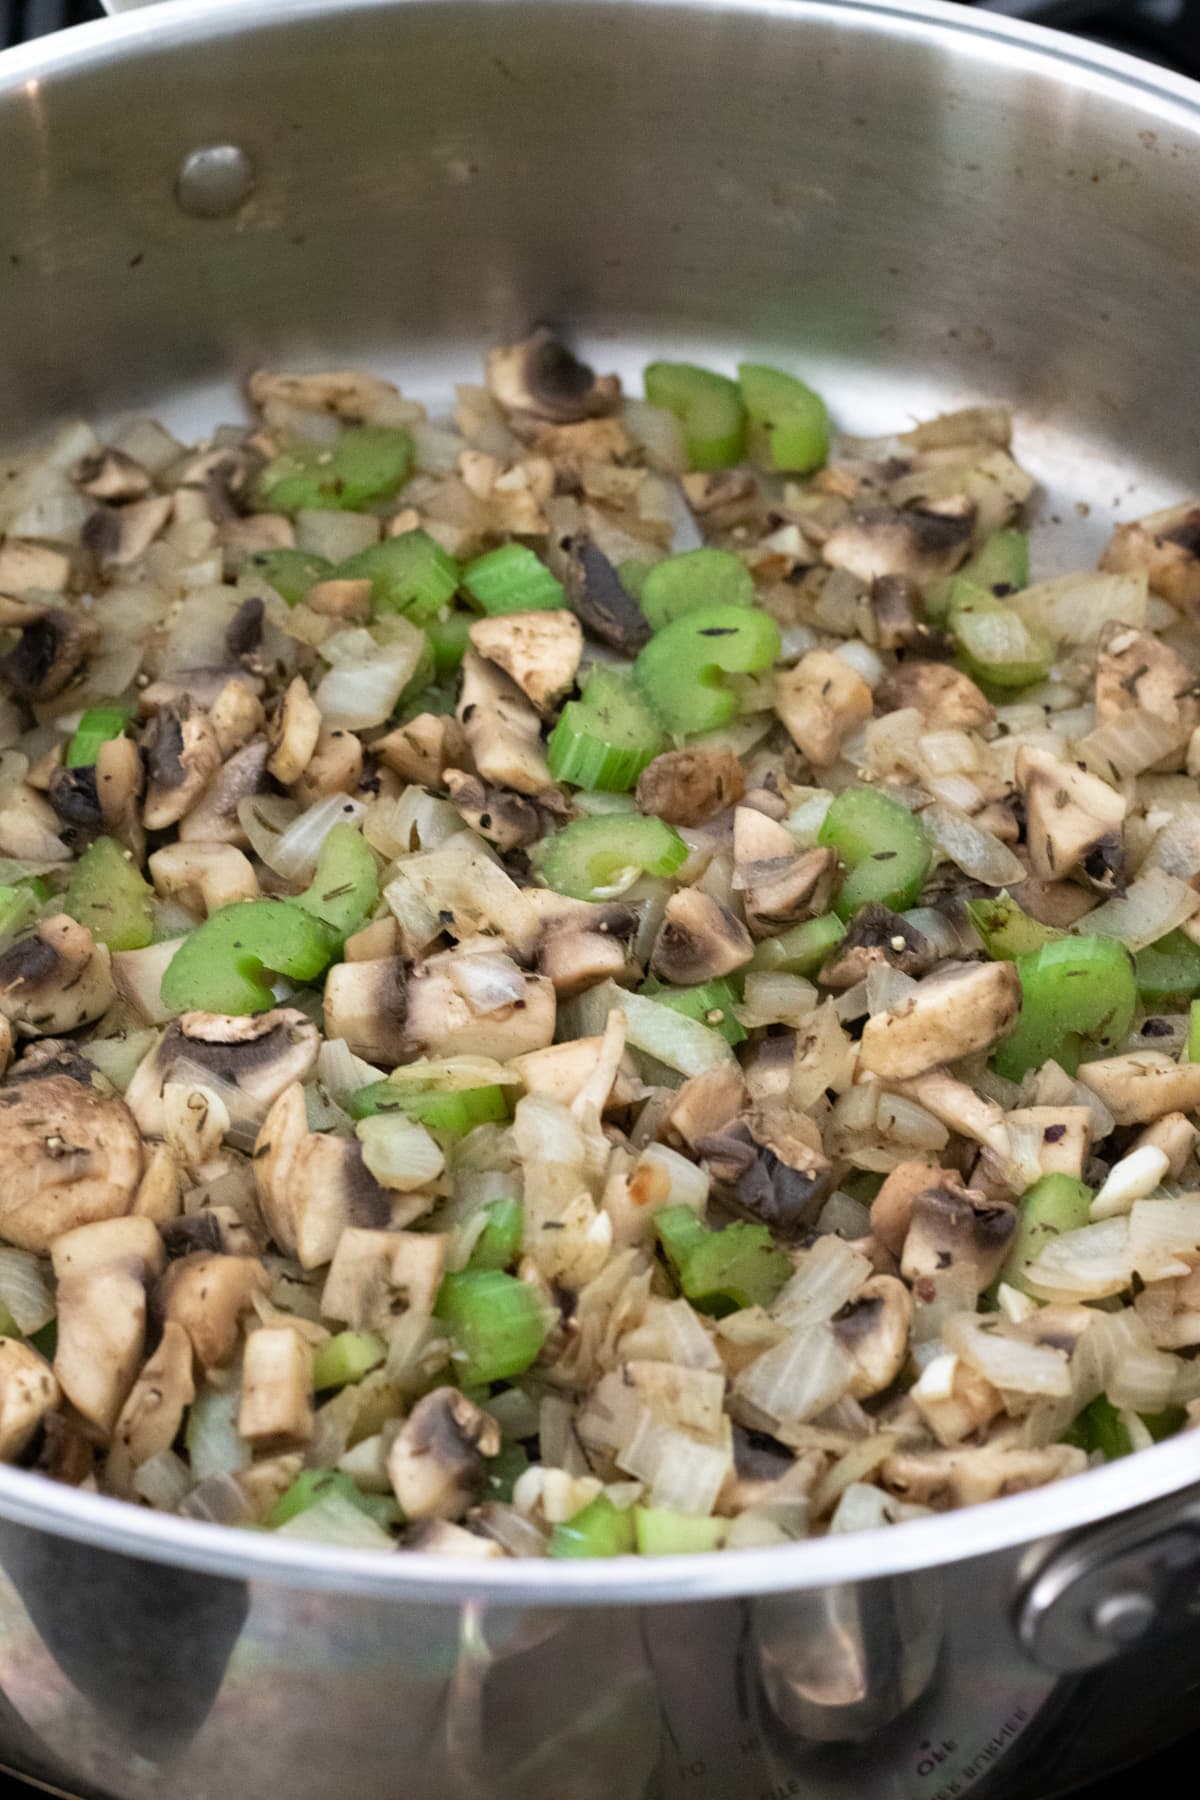 sautéing onion, mushrooms, celery, and herbs for dressing / stuffing.